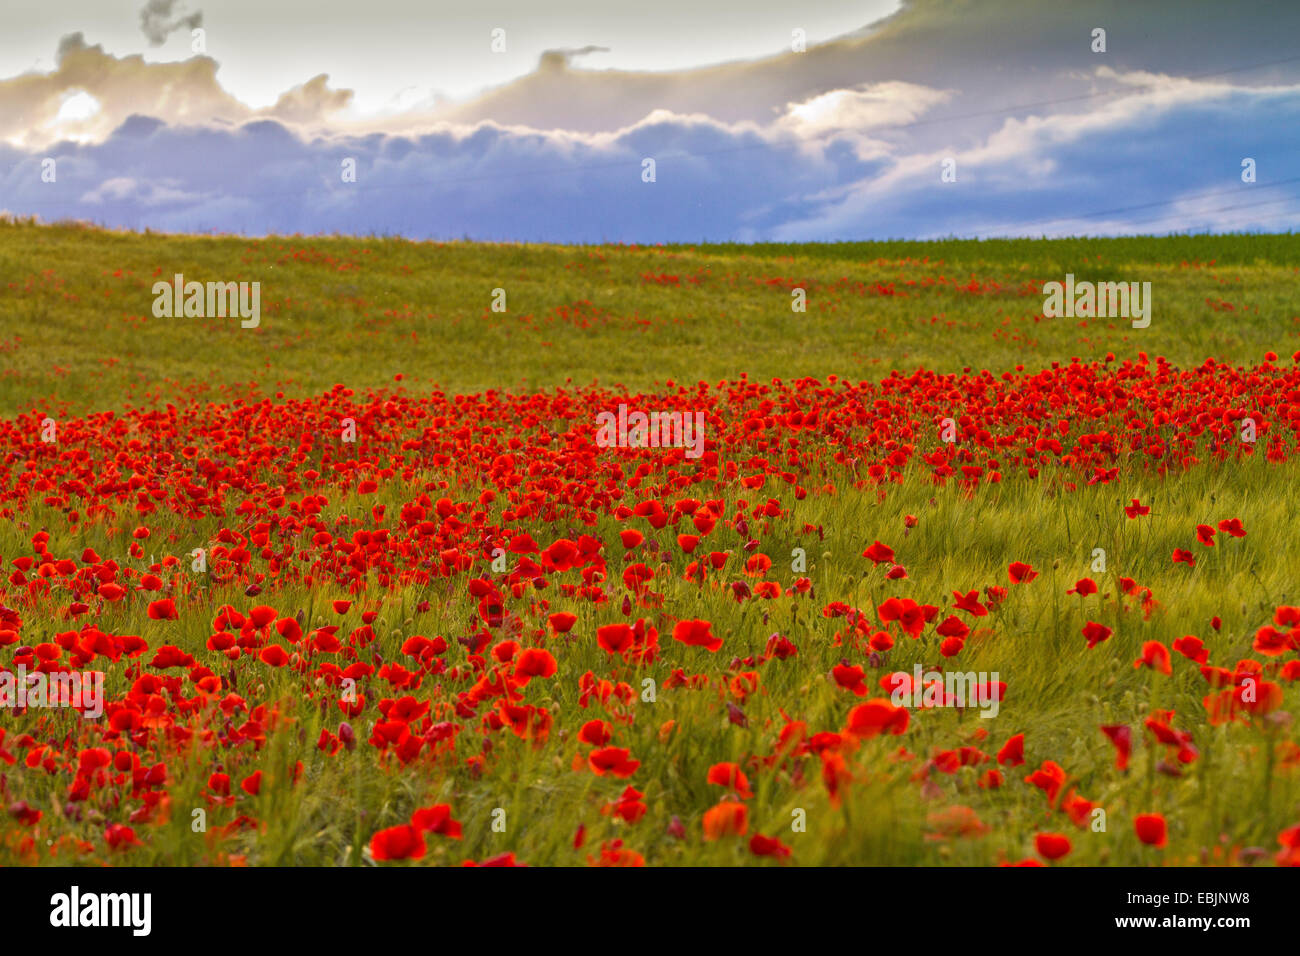 Common poppy, Corn poppy, Red poppy (Papaver rhoeas), in a cornfield with thunderclouds, Germany, Bavaria Stock Photo